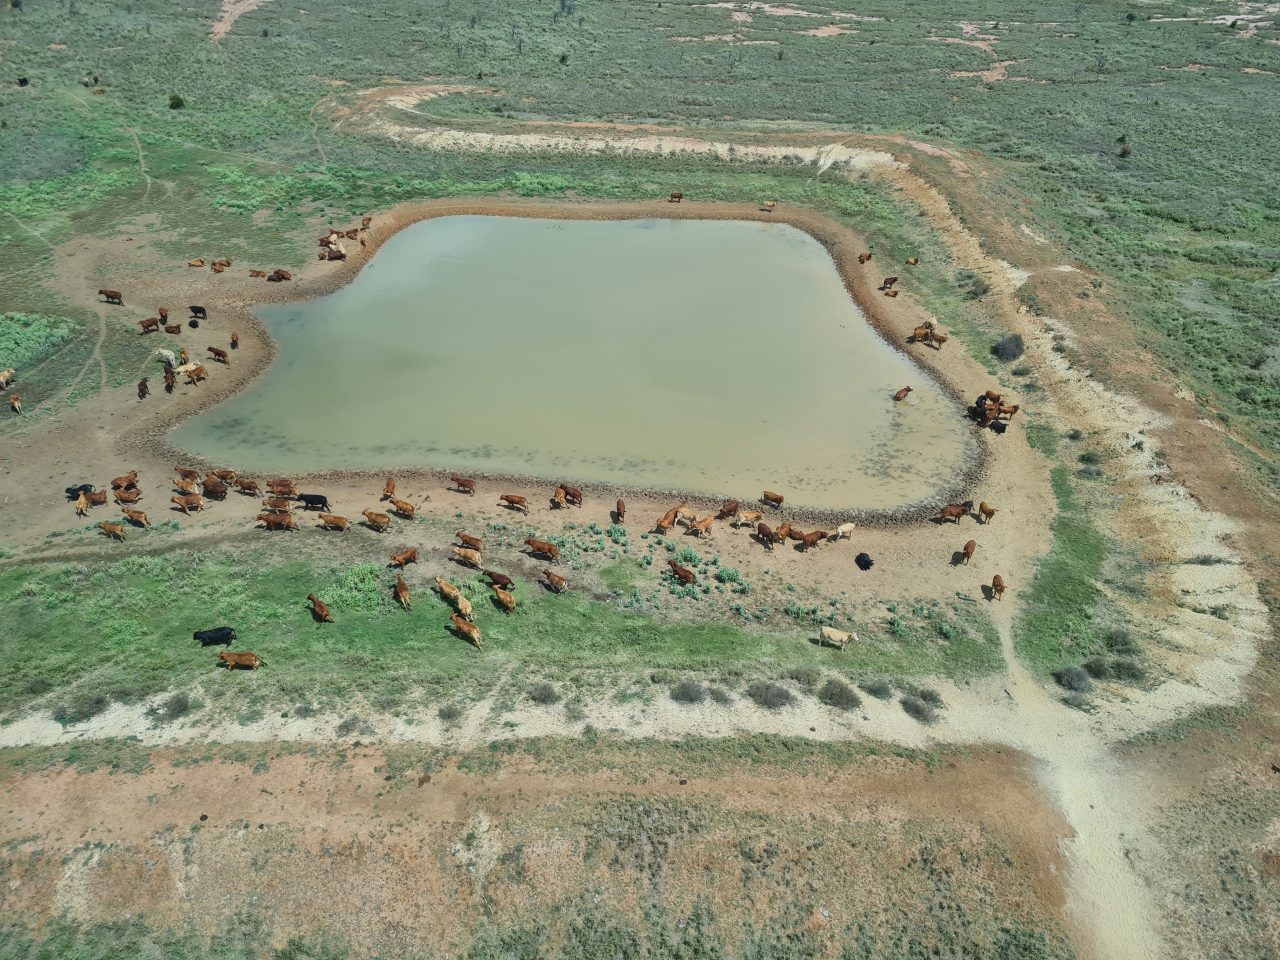 Aerial photo of a herd of cattle standing and some drinking at a round cornered rectangle dam surrounded by concentric rings of the dam's shape showing previous high water marks in a floodplain covered with low, green vegetation